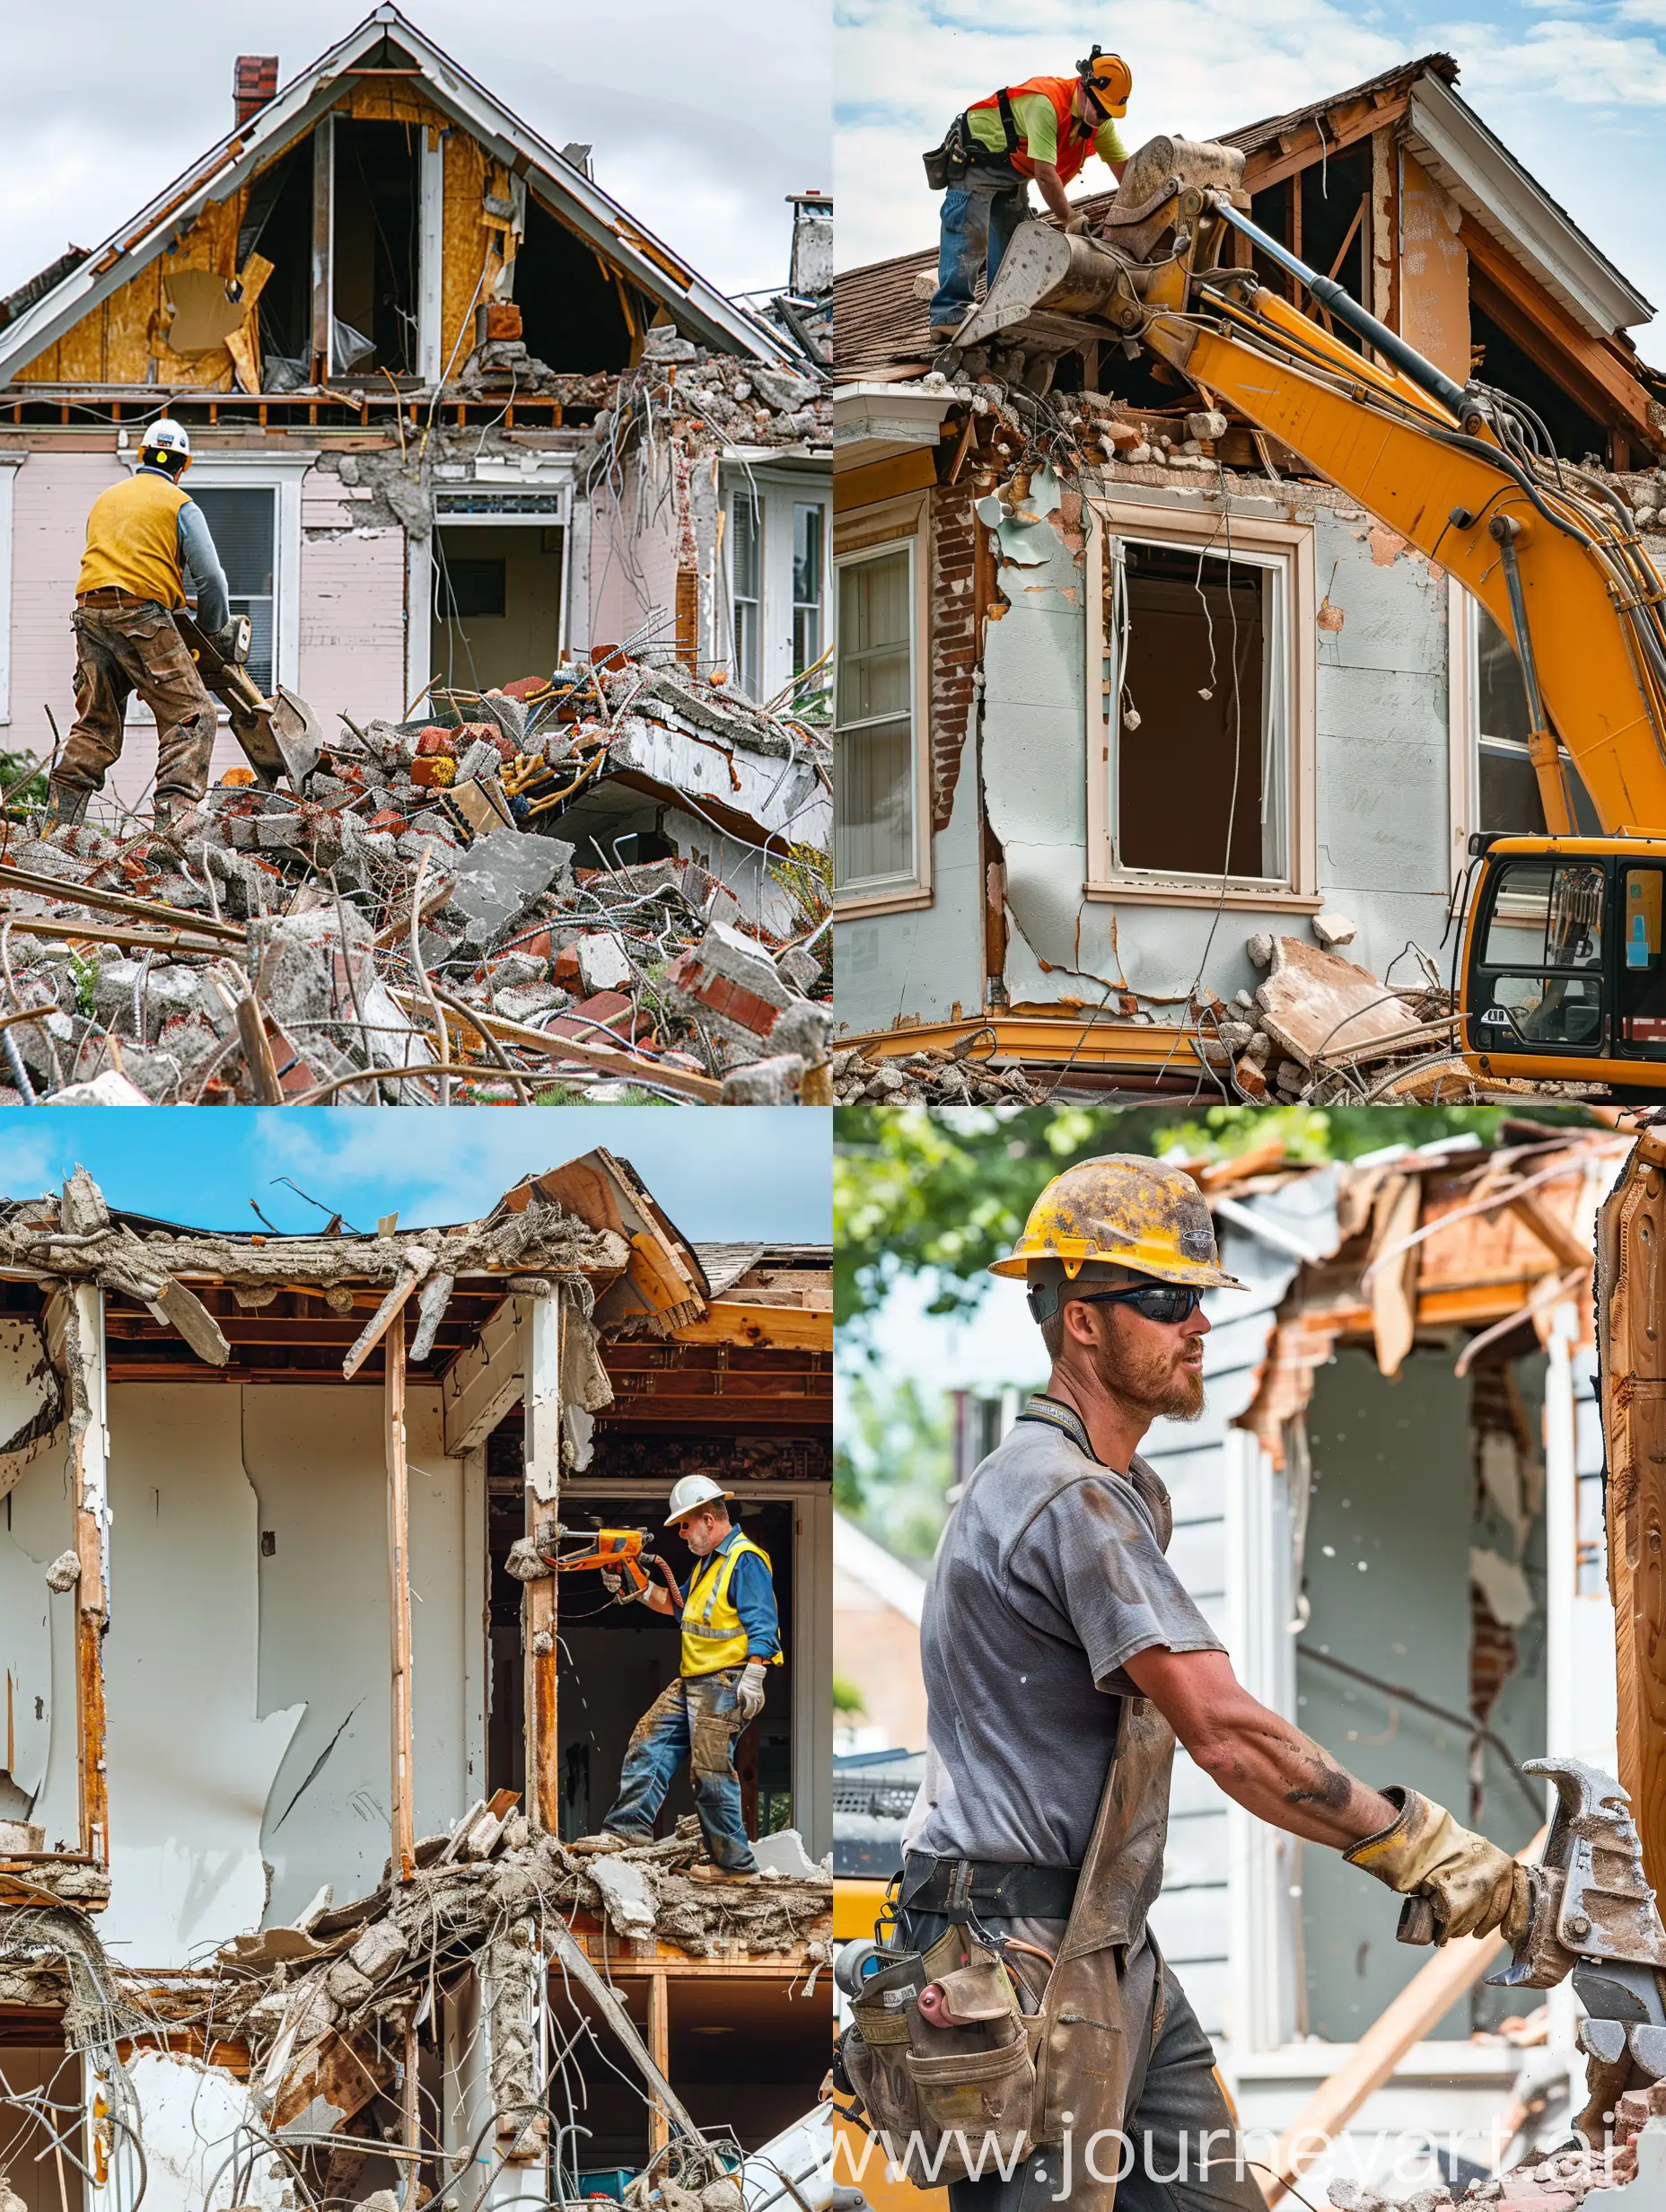 A cool demolition worker, tearing down an old house, very realistic